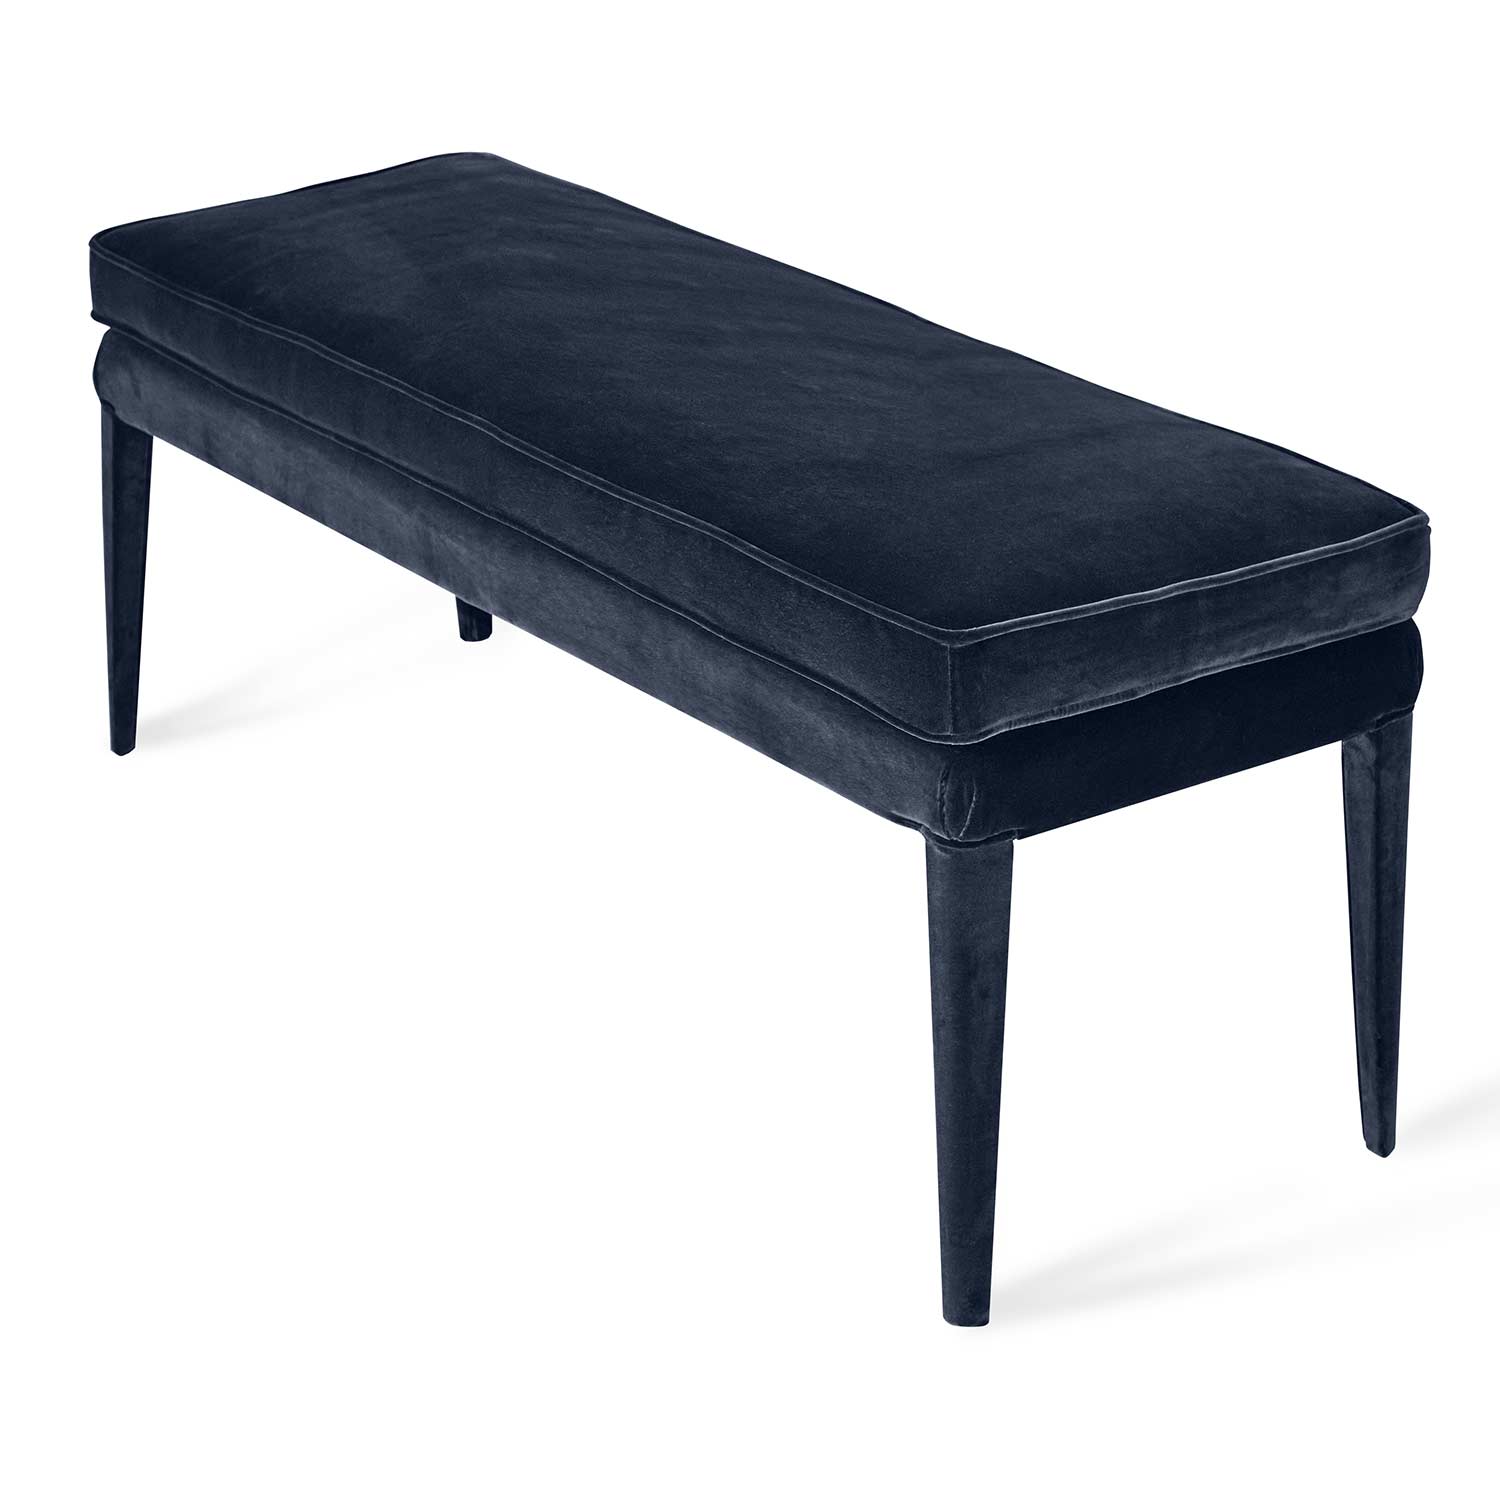 Wide-Sized, Adaptable Ottoman Bench